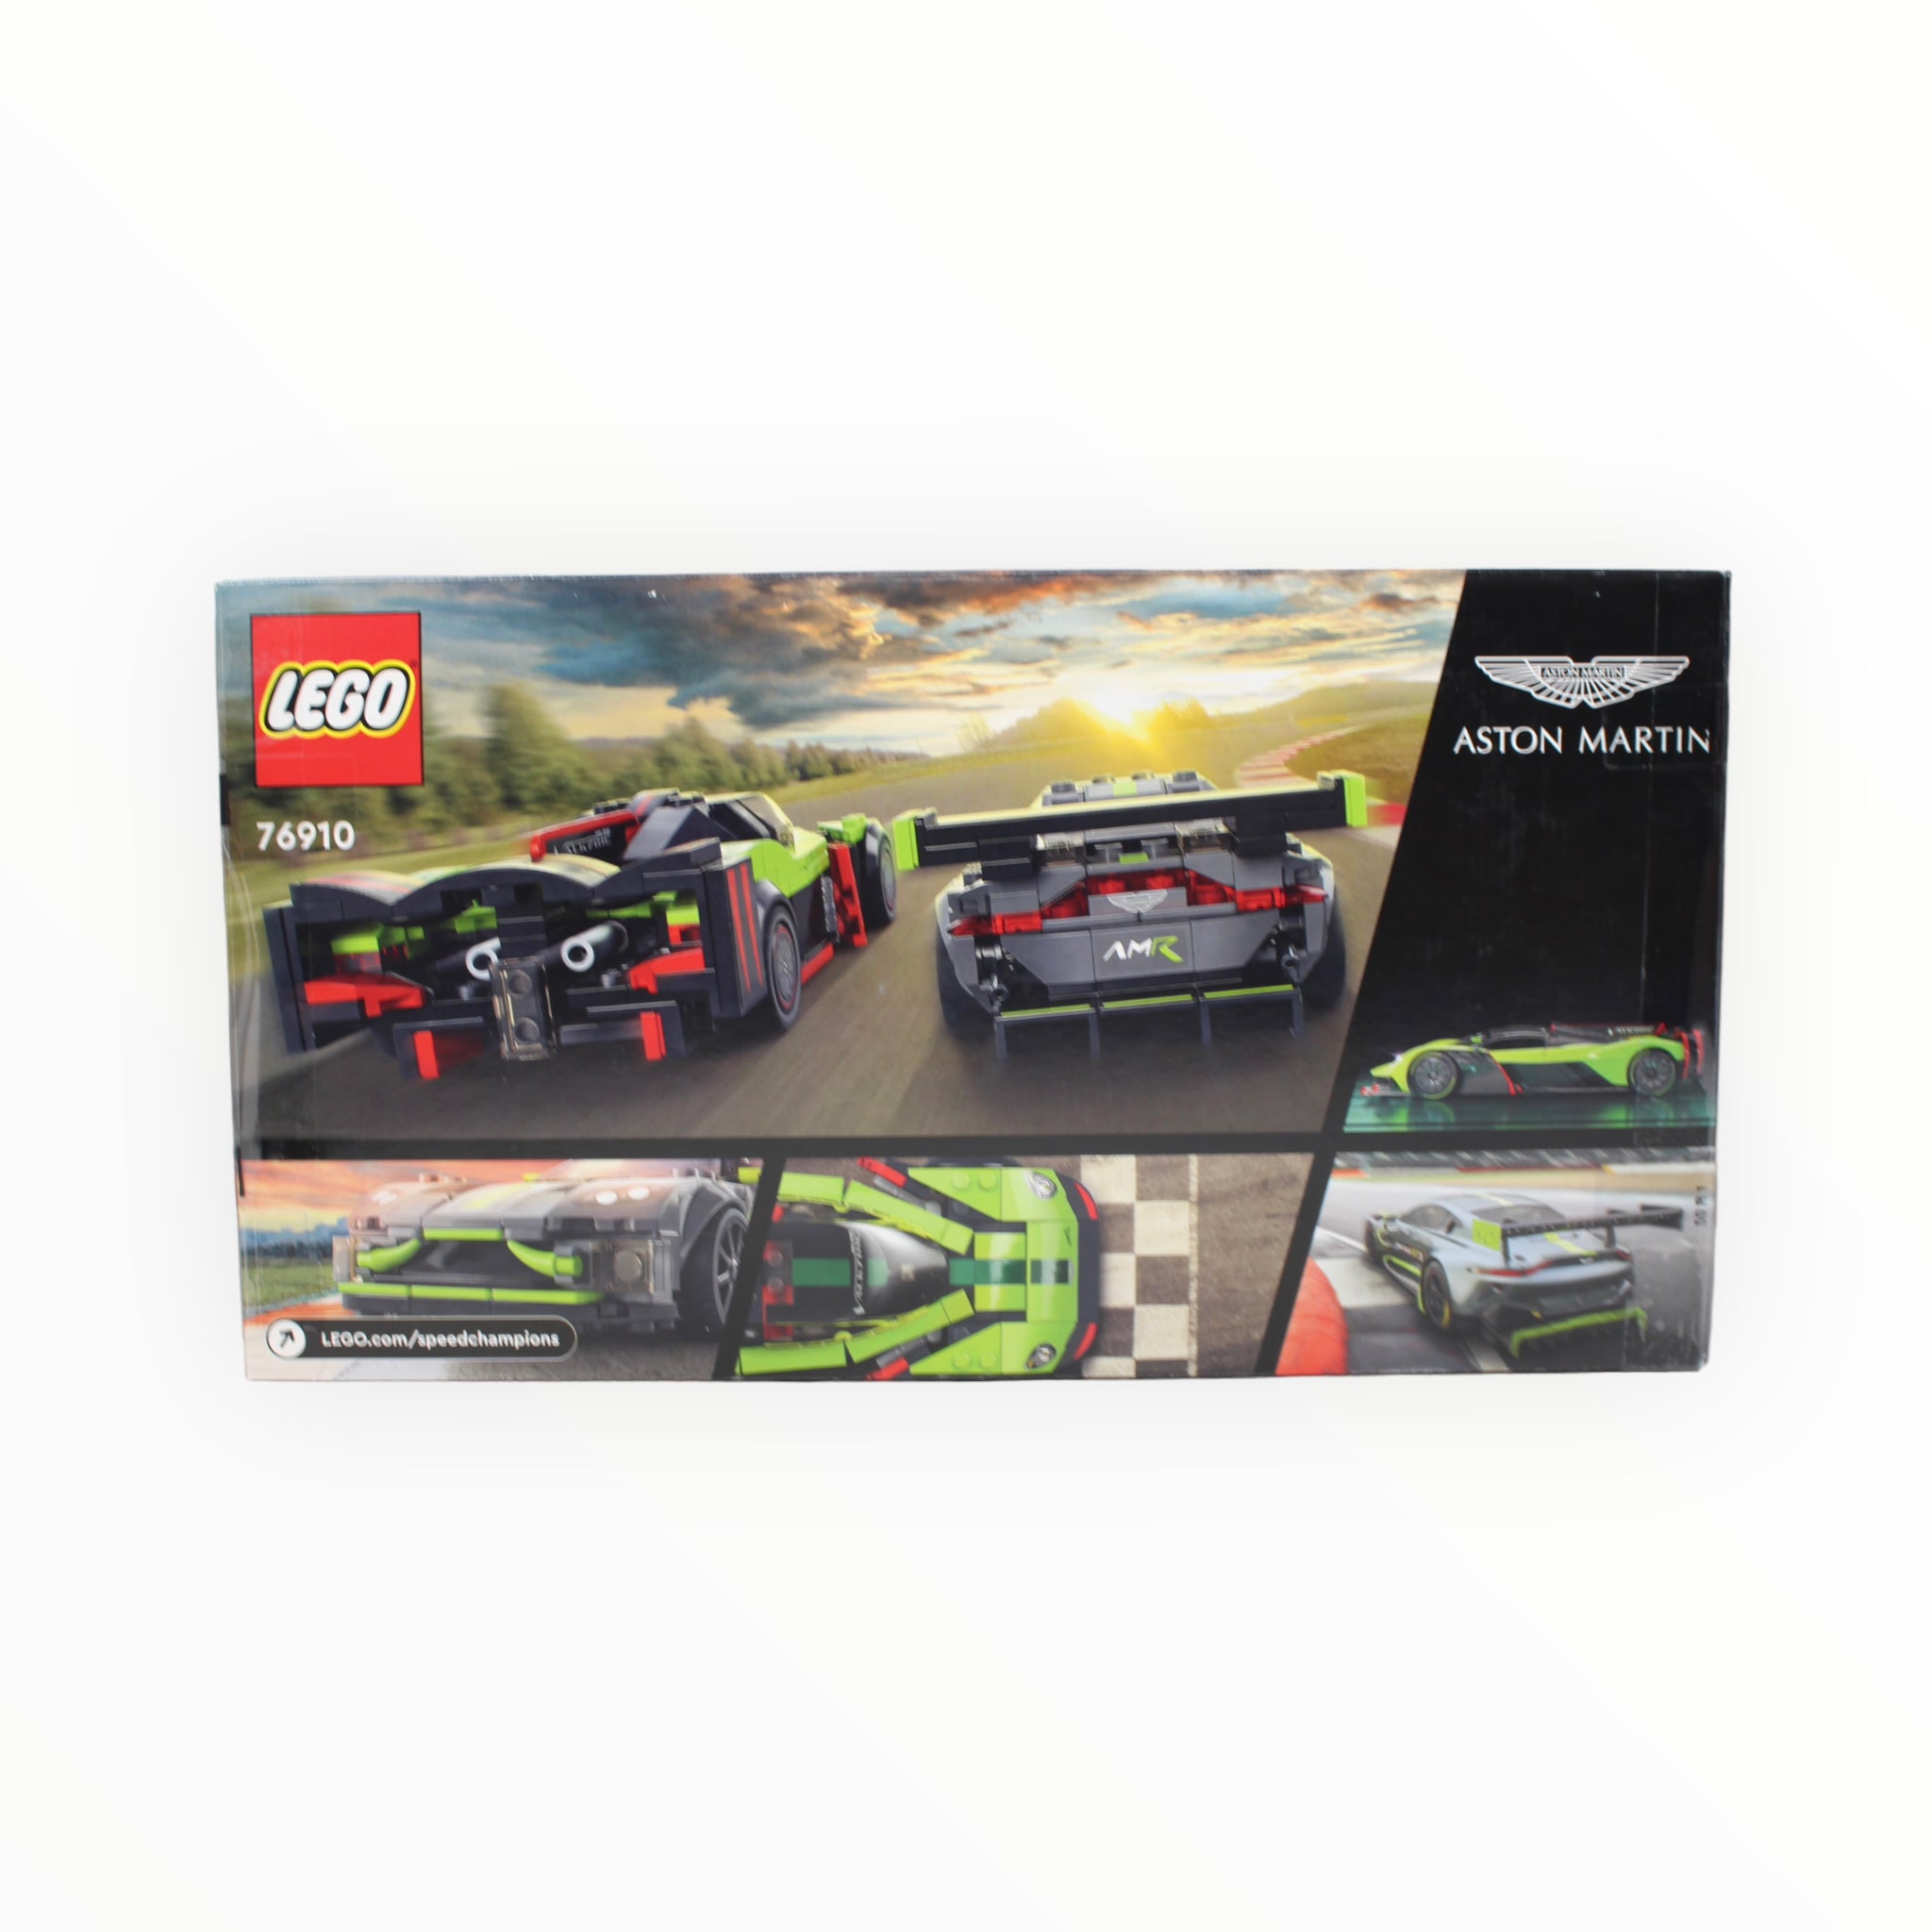 Certified Used Set 76910 Speed Champions Aston Martin Valkyrie AMR Pro and Aston Martin Vantage GT3